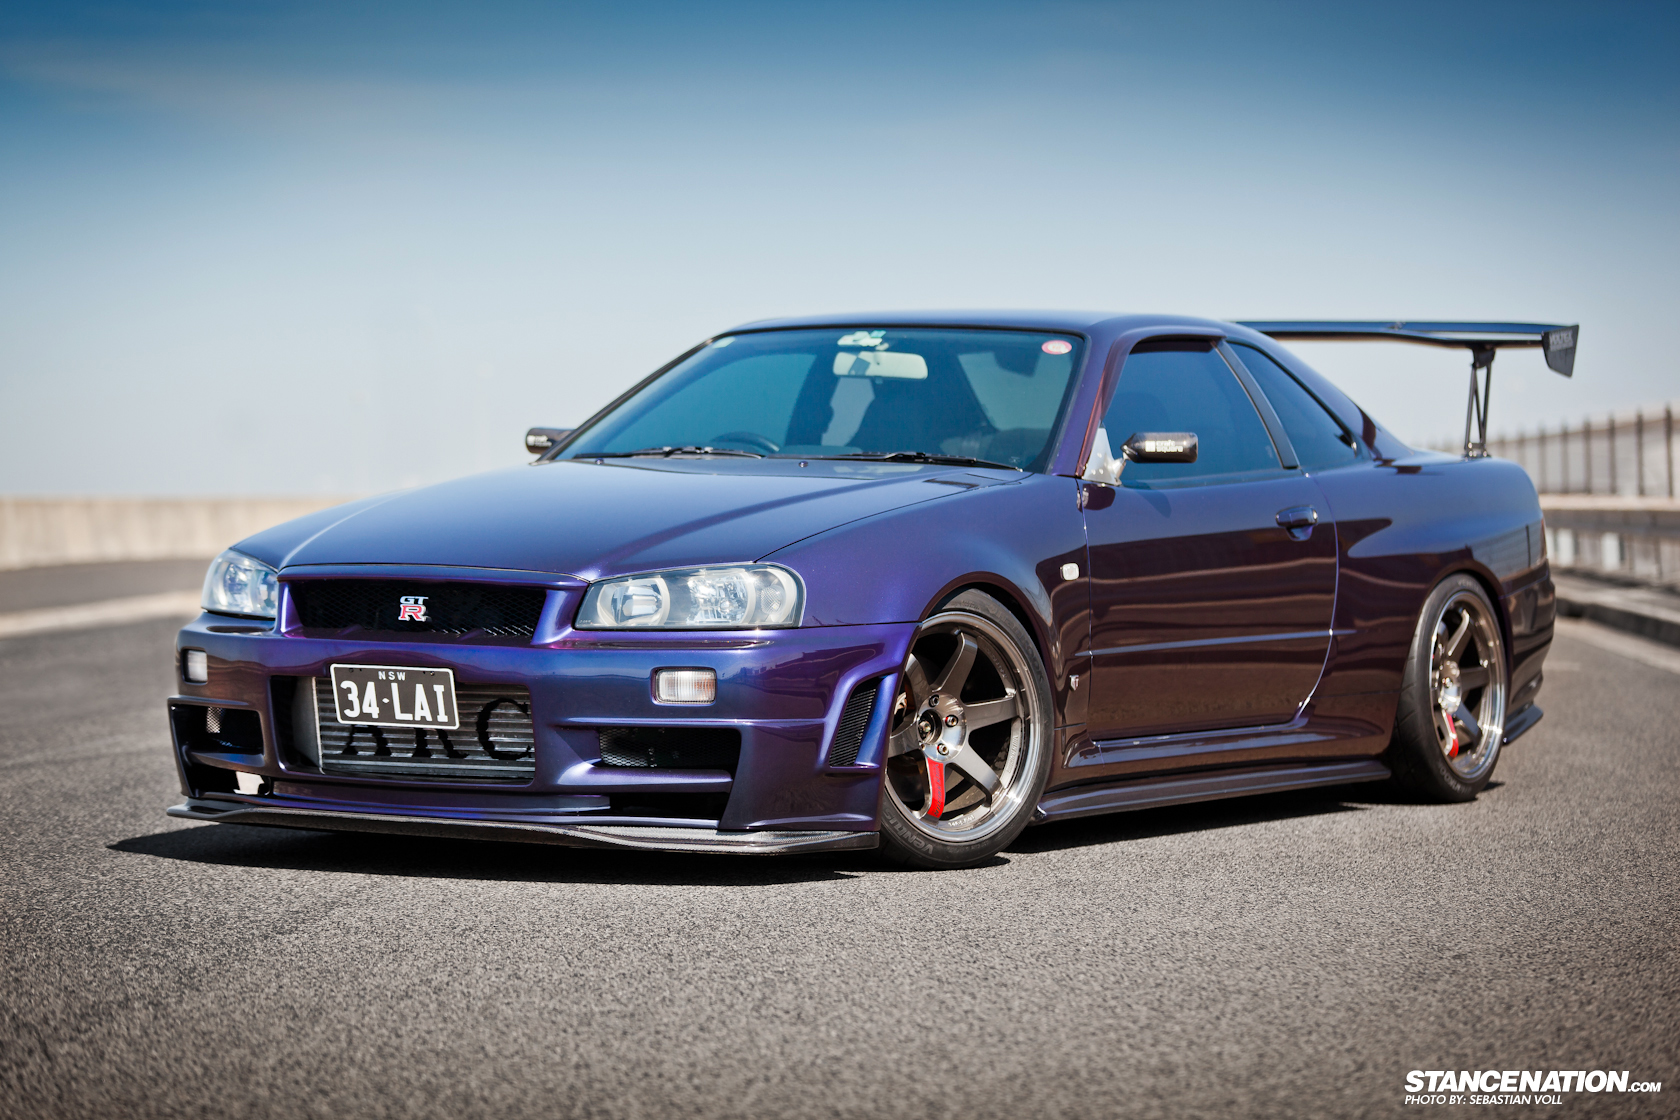 Nissan Skyline R34 Wallpapers Vehicles Hq Nissan Skyline R34 Pictures 4k Wallpapers 19